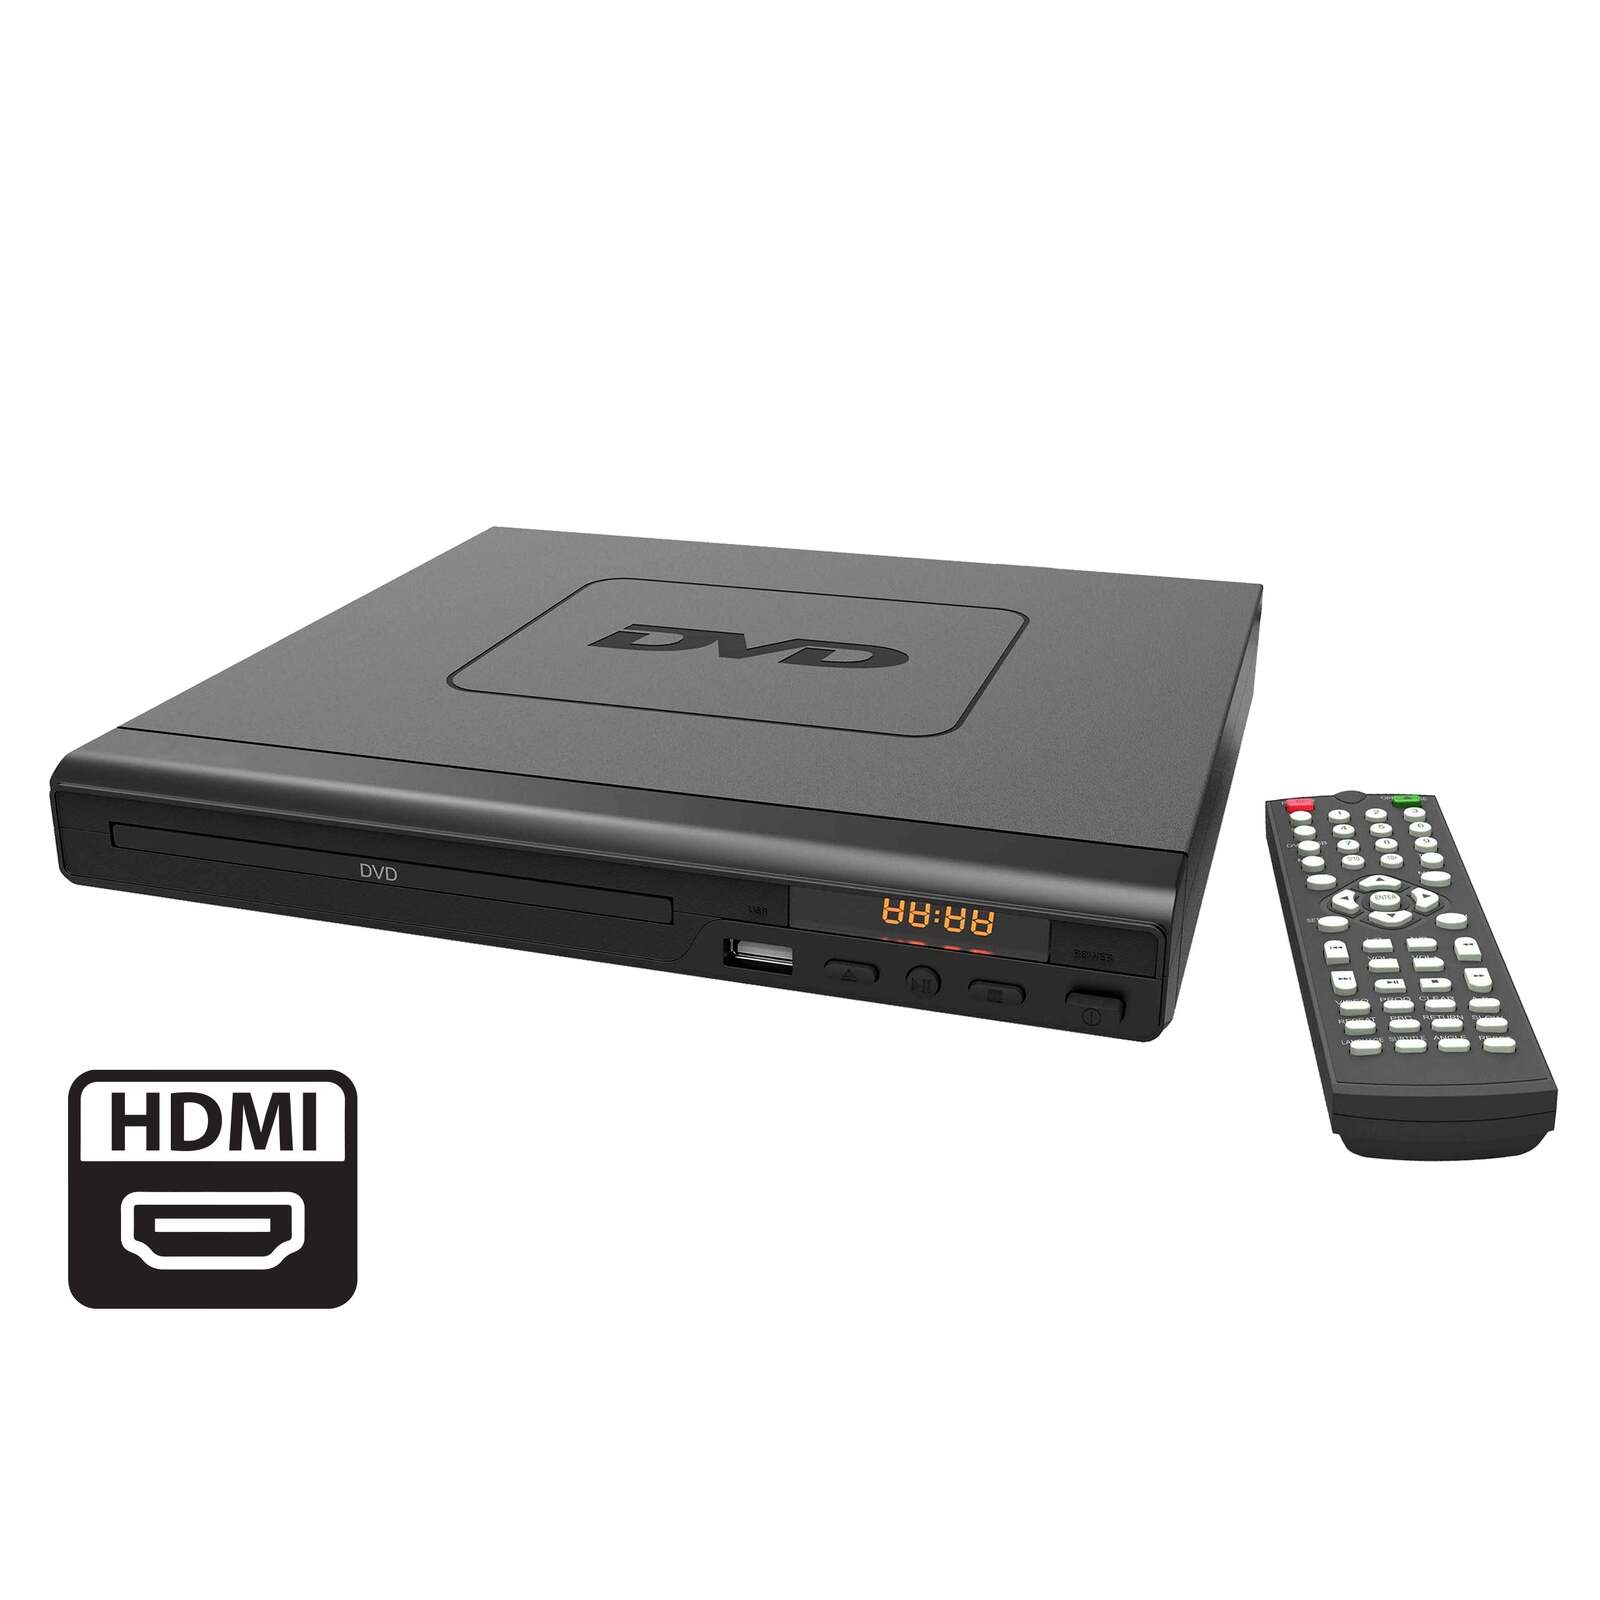 HDMI DVD Player (Black) w/ Remote Control, Compact Size, 8 Languages - SILBERSHELL